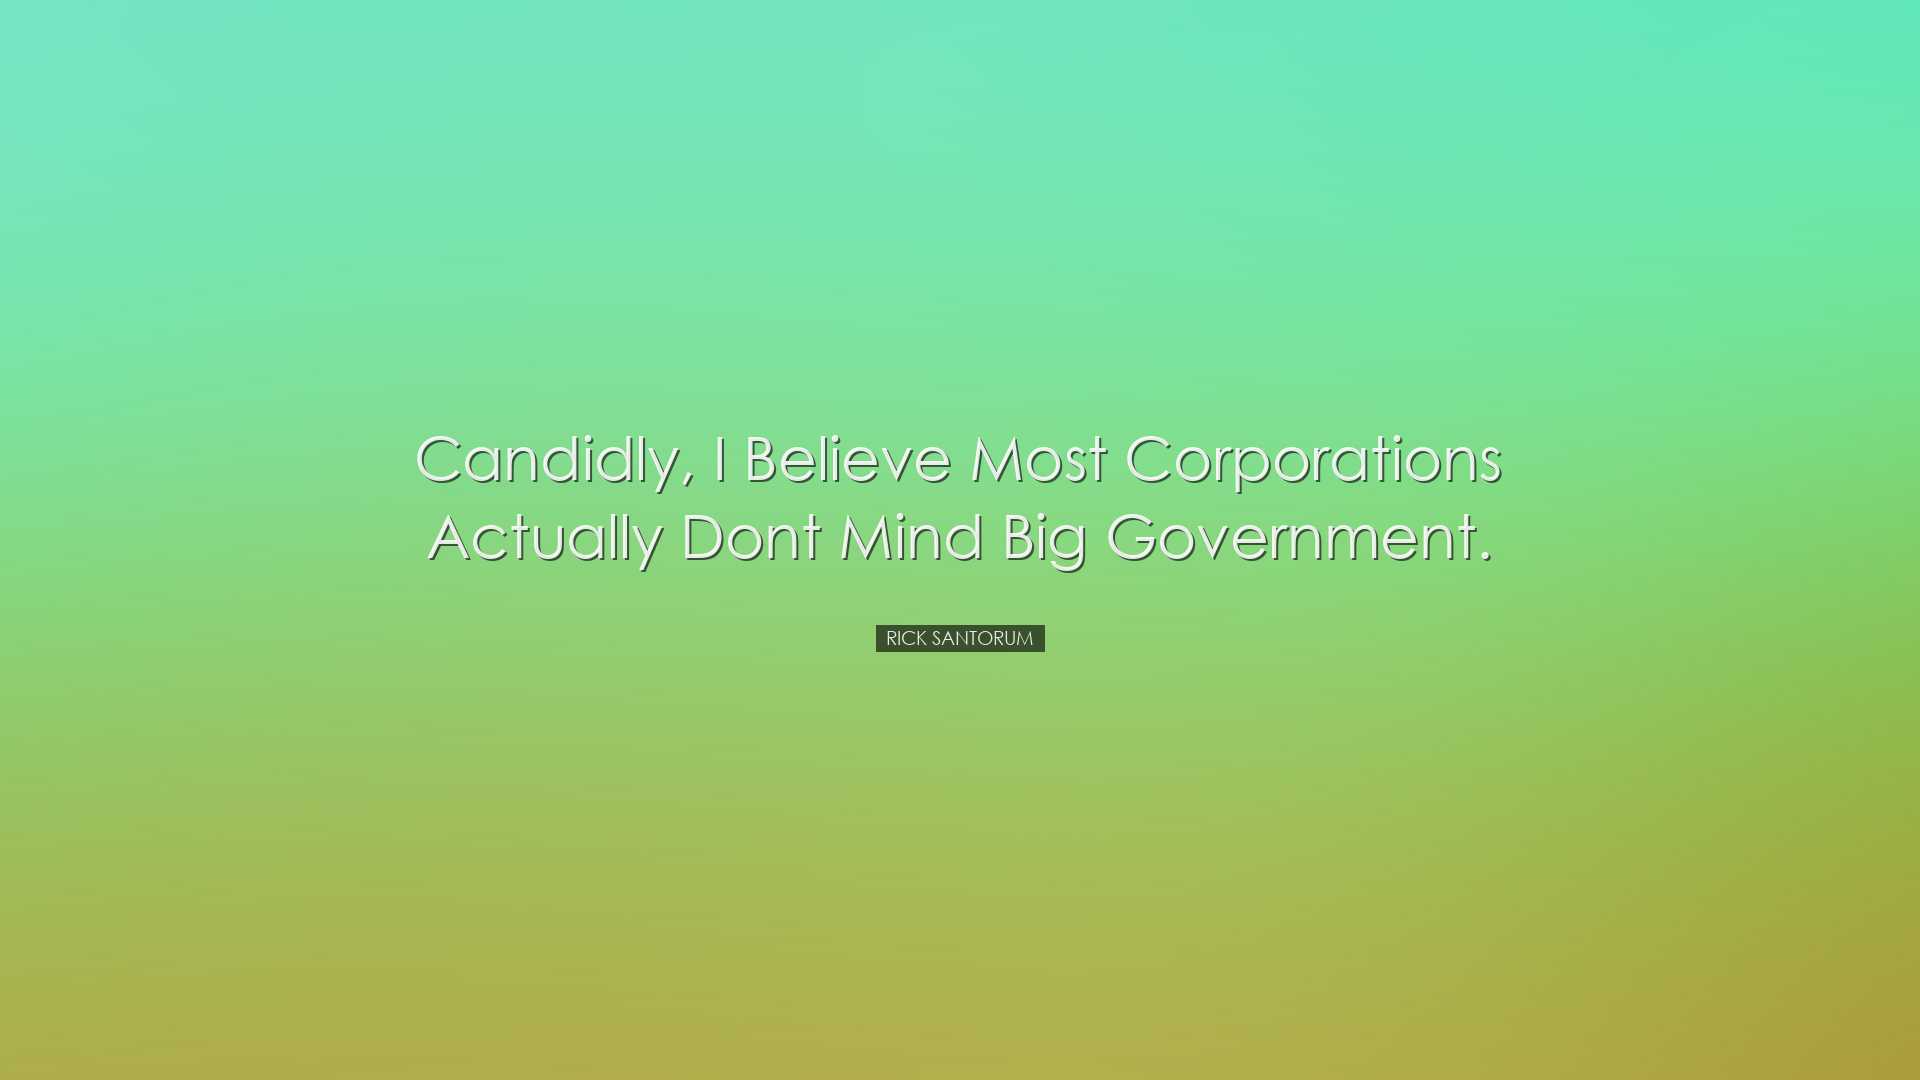 Candidly, I believe most corporations actually dont mind big gover